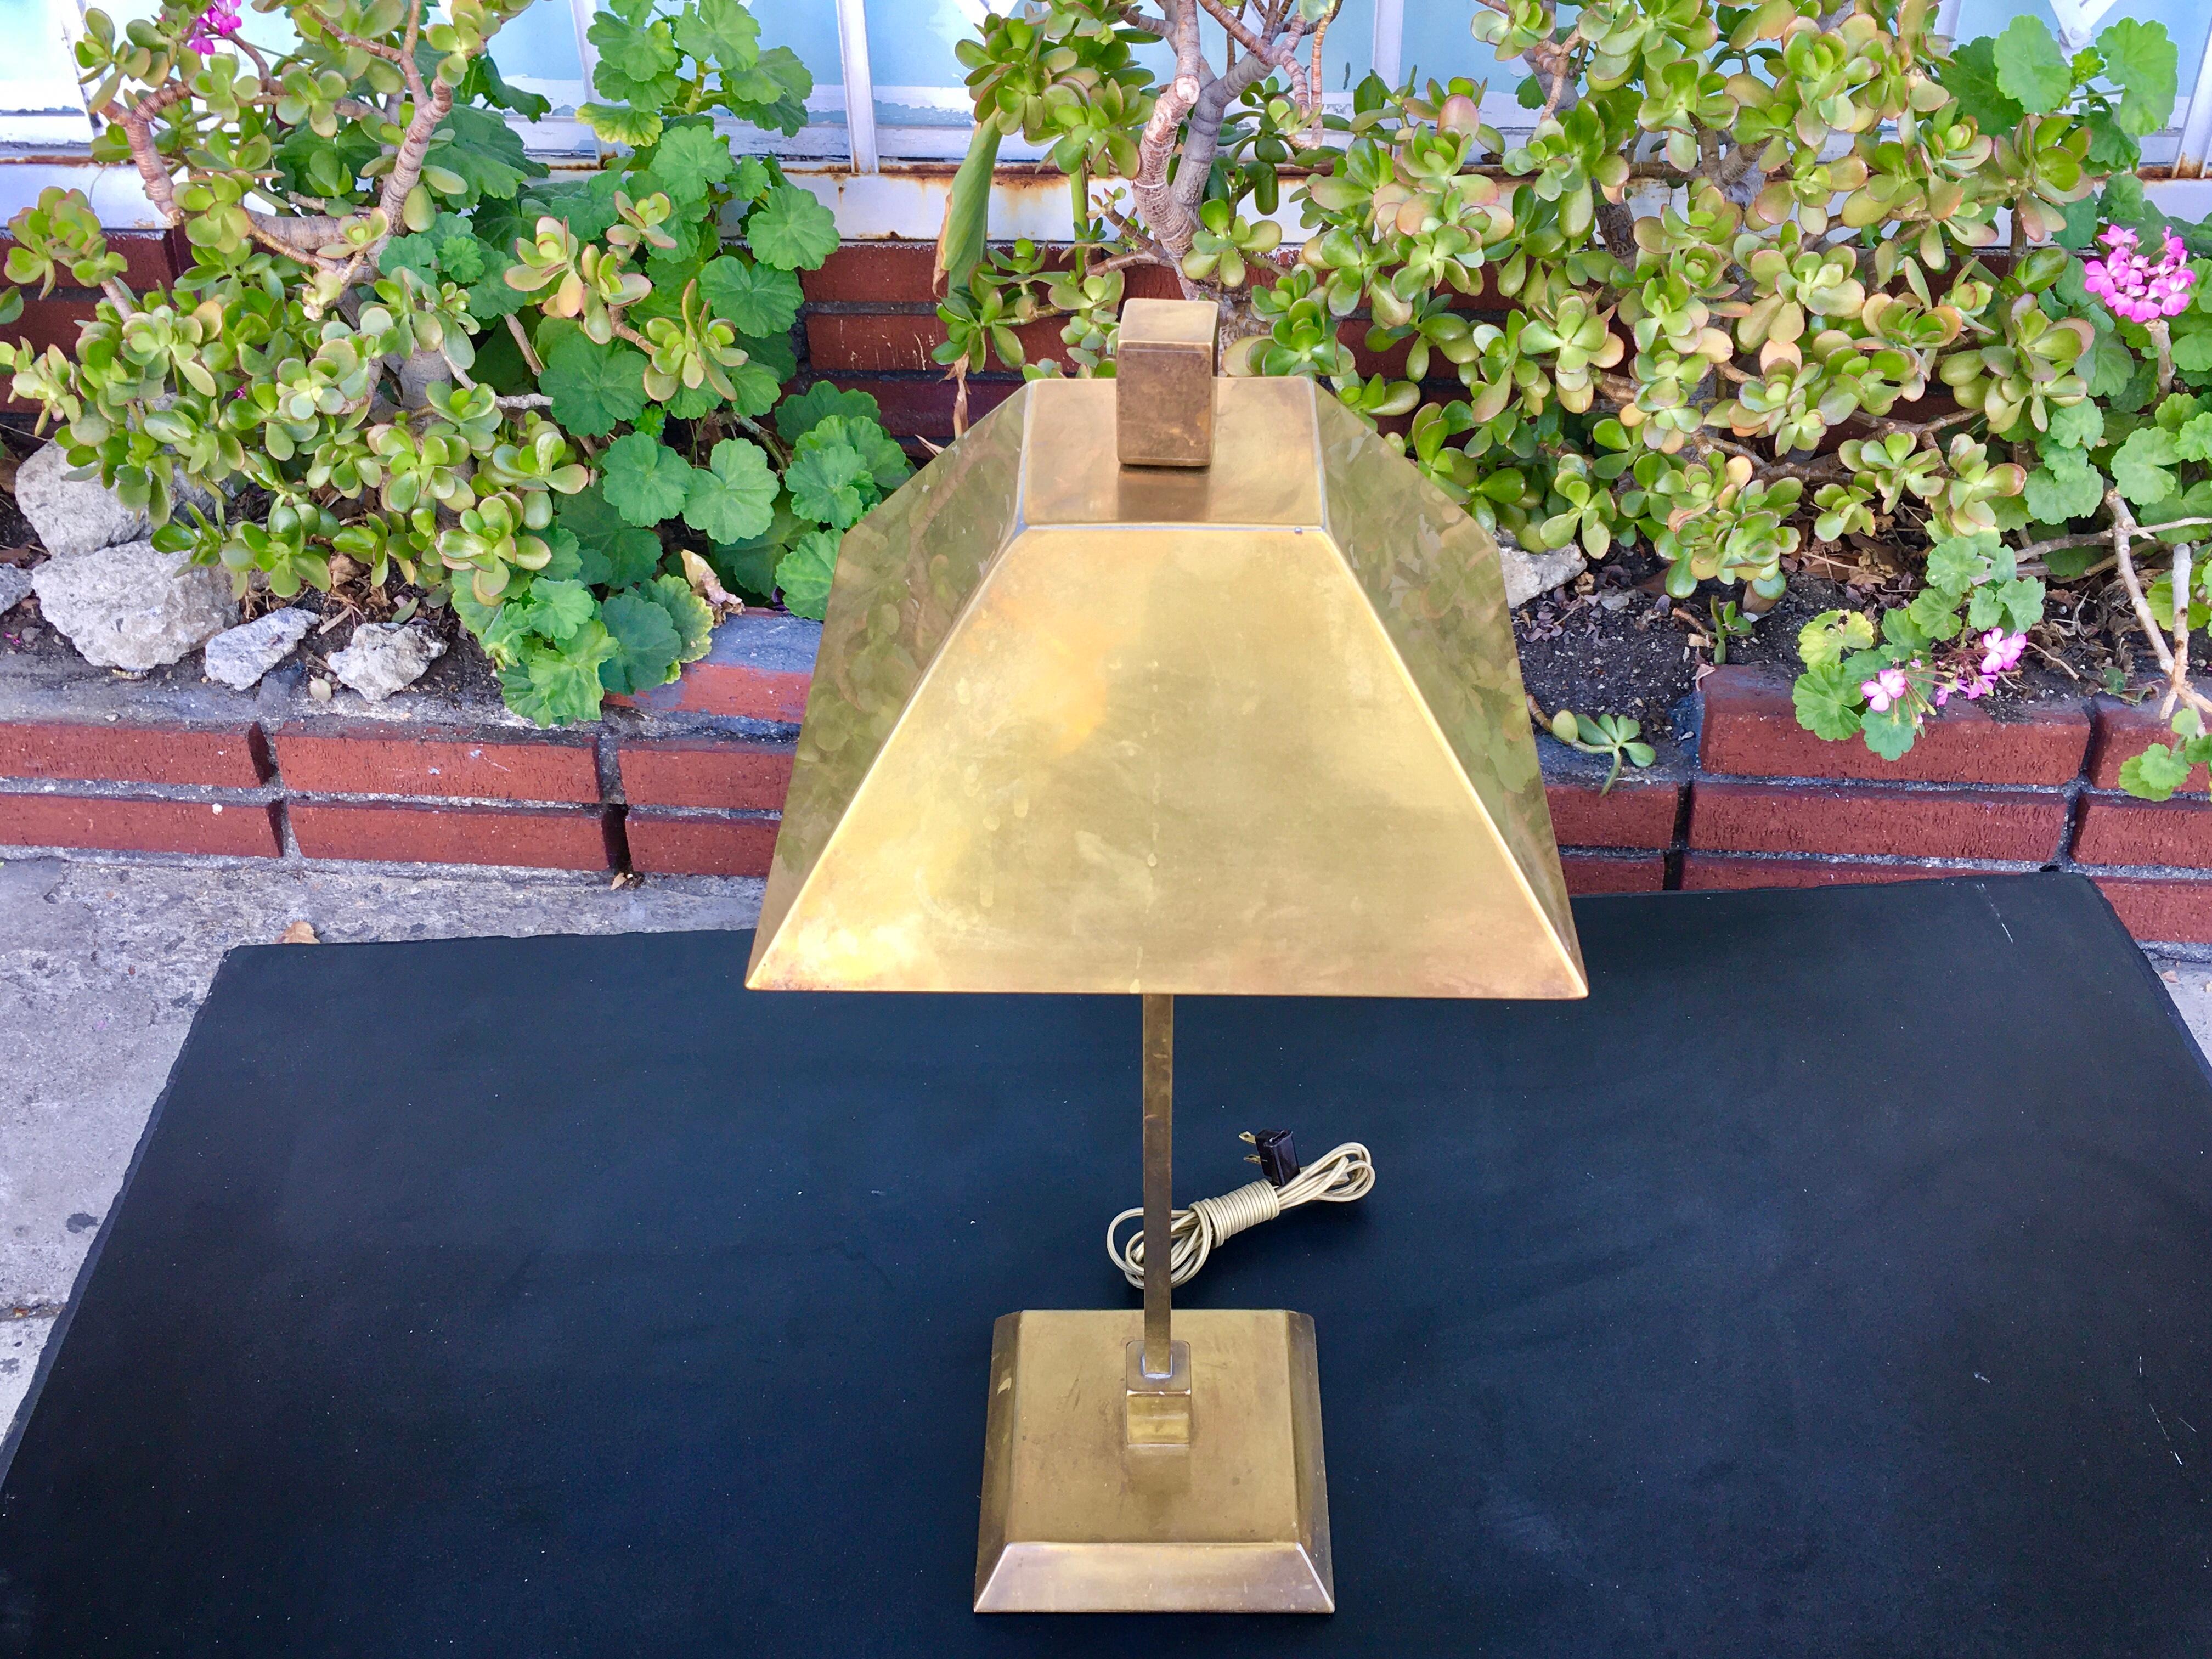 This Single Brass Lamp is a unique piece, does have some damages to it but overall such an amazing piece and such a great conversation starter for your next get together.